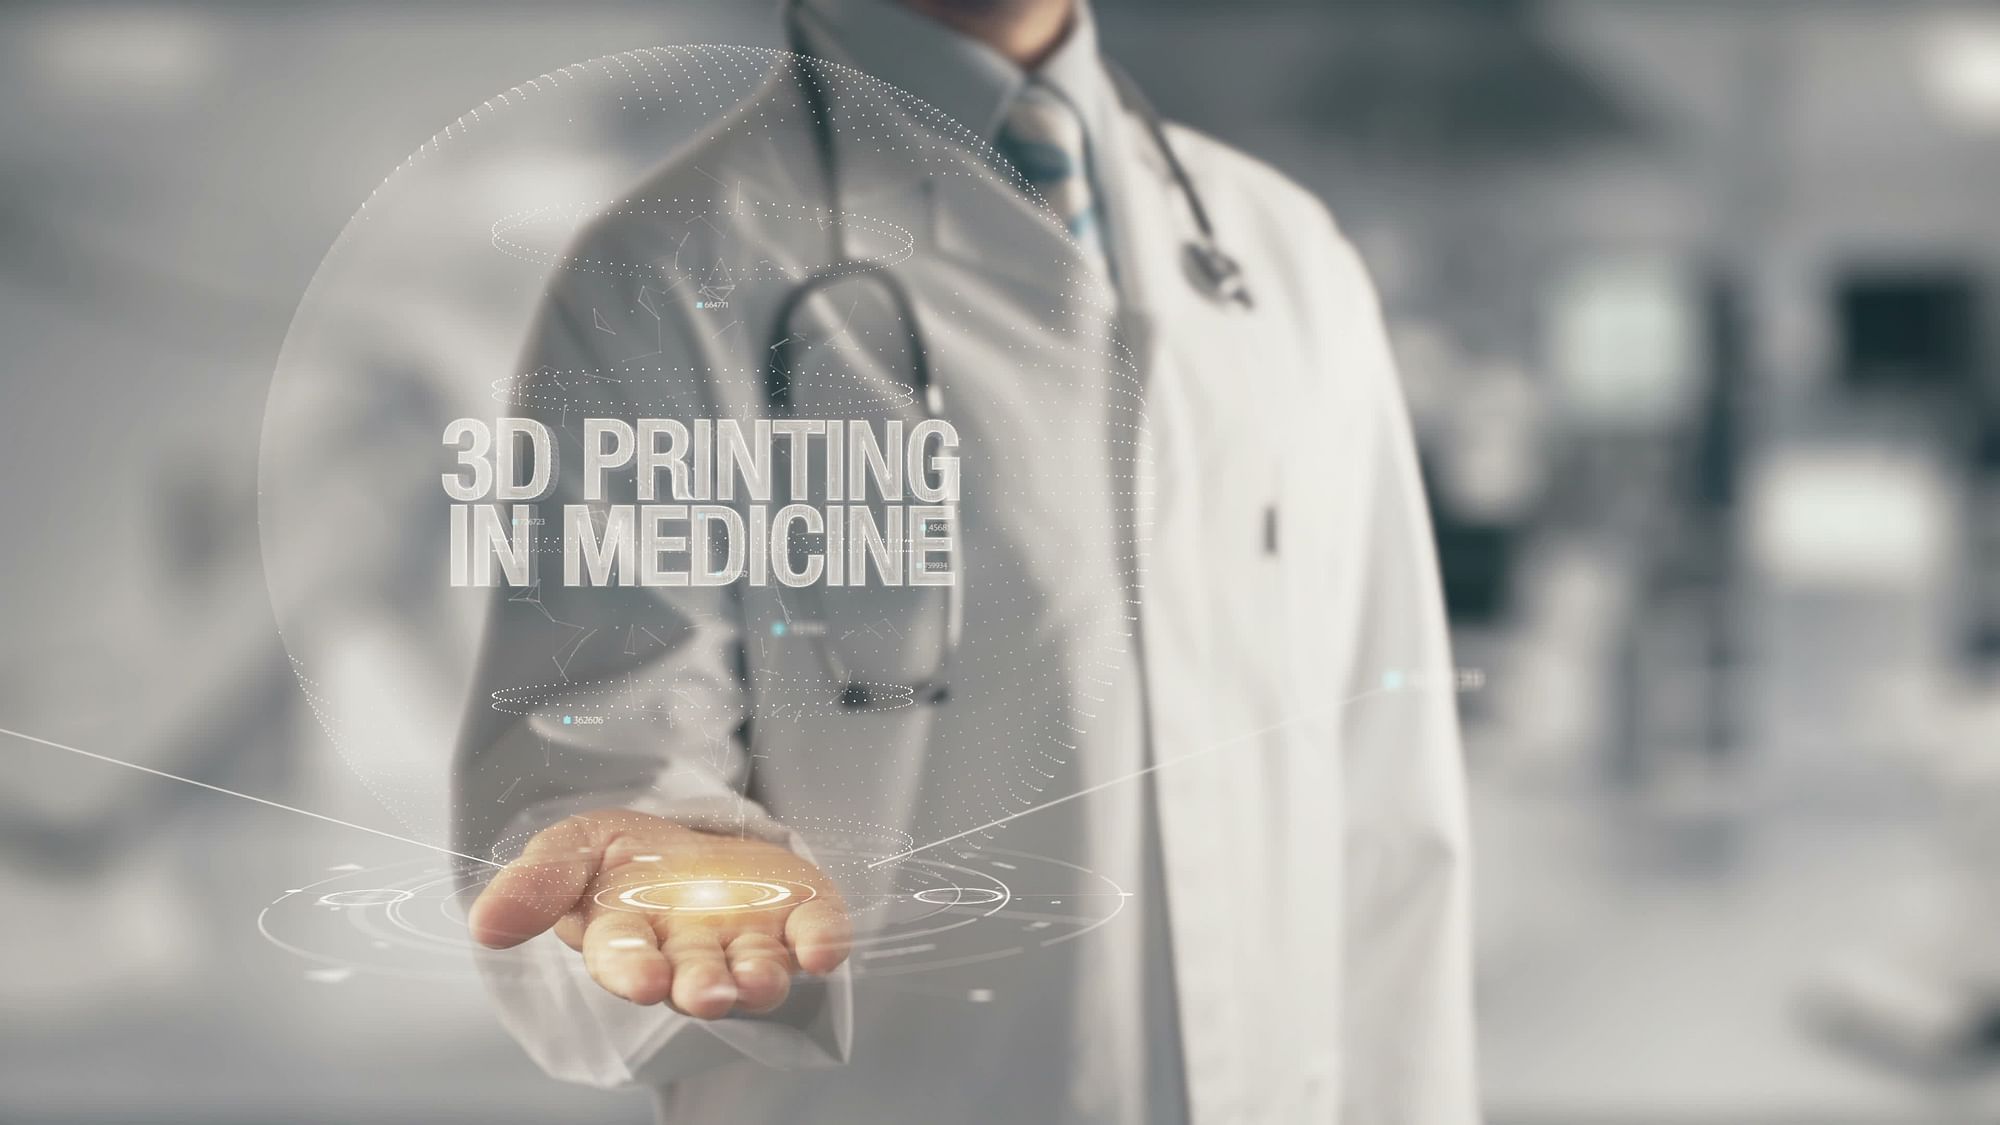 A team of researchers in the US have found a way to create living skin using 3D printers.